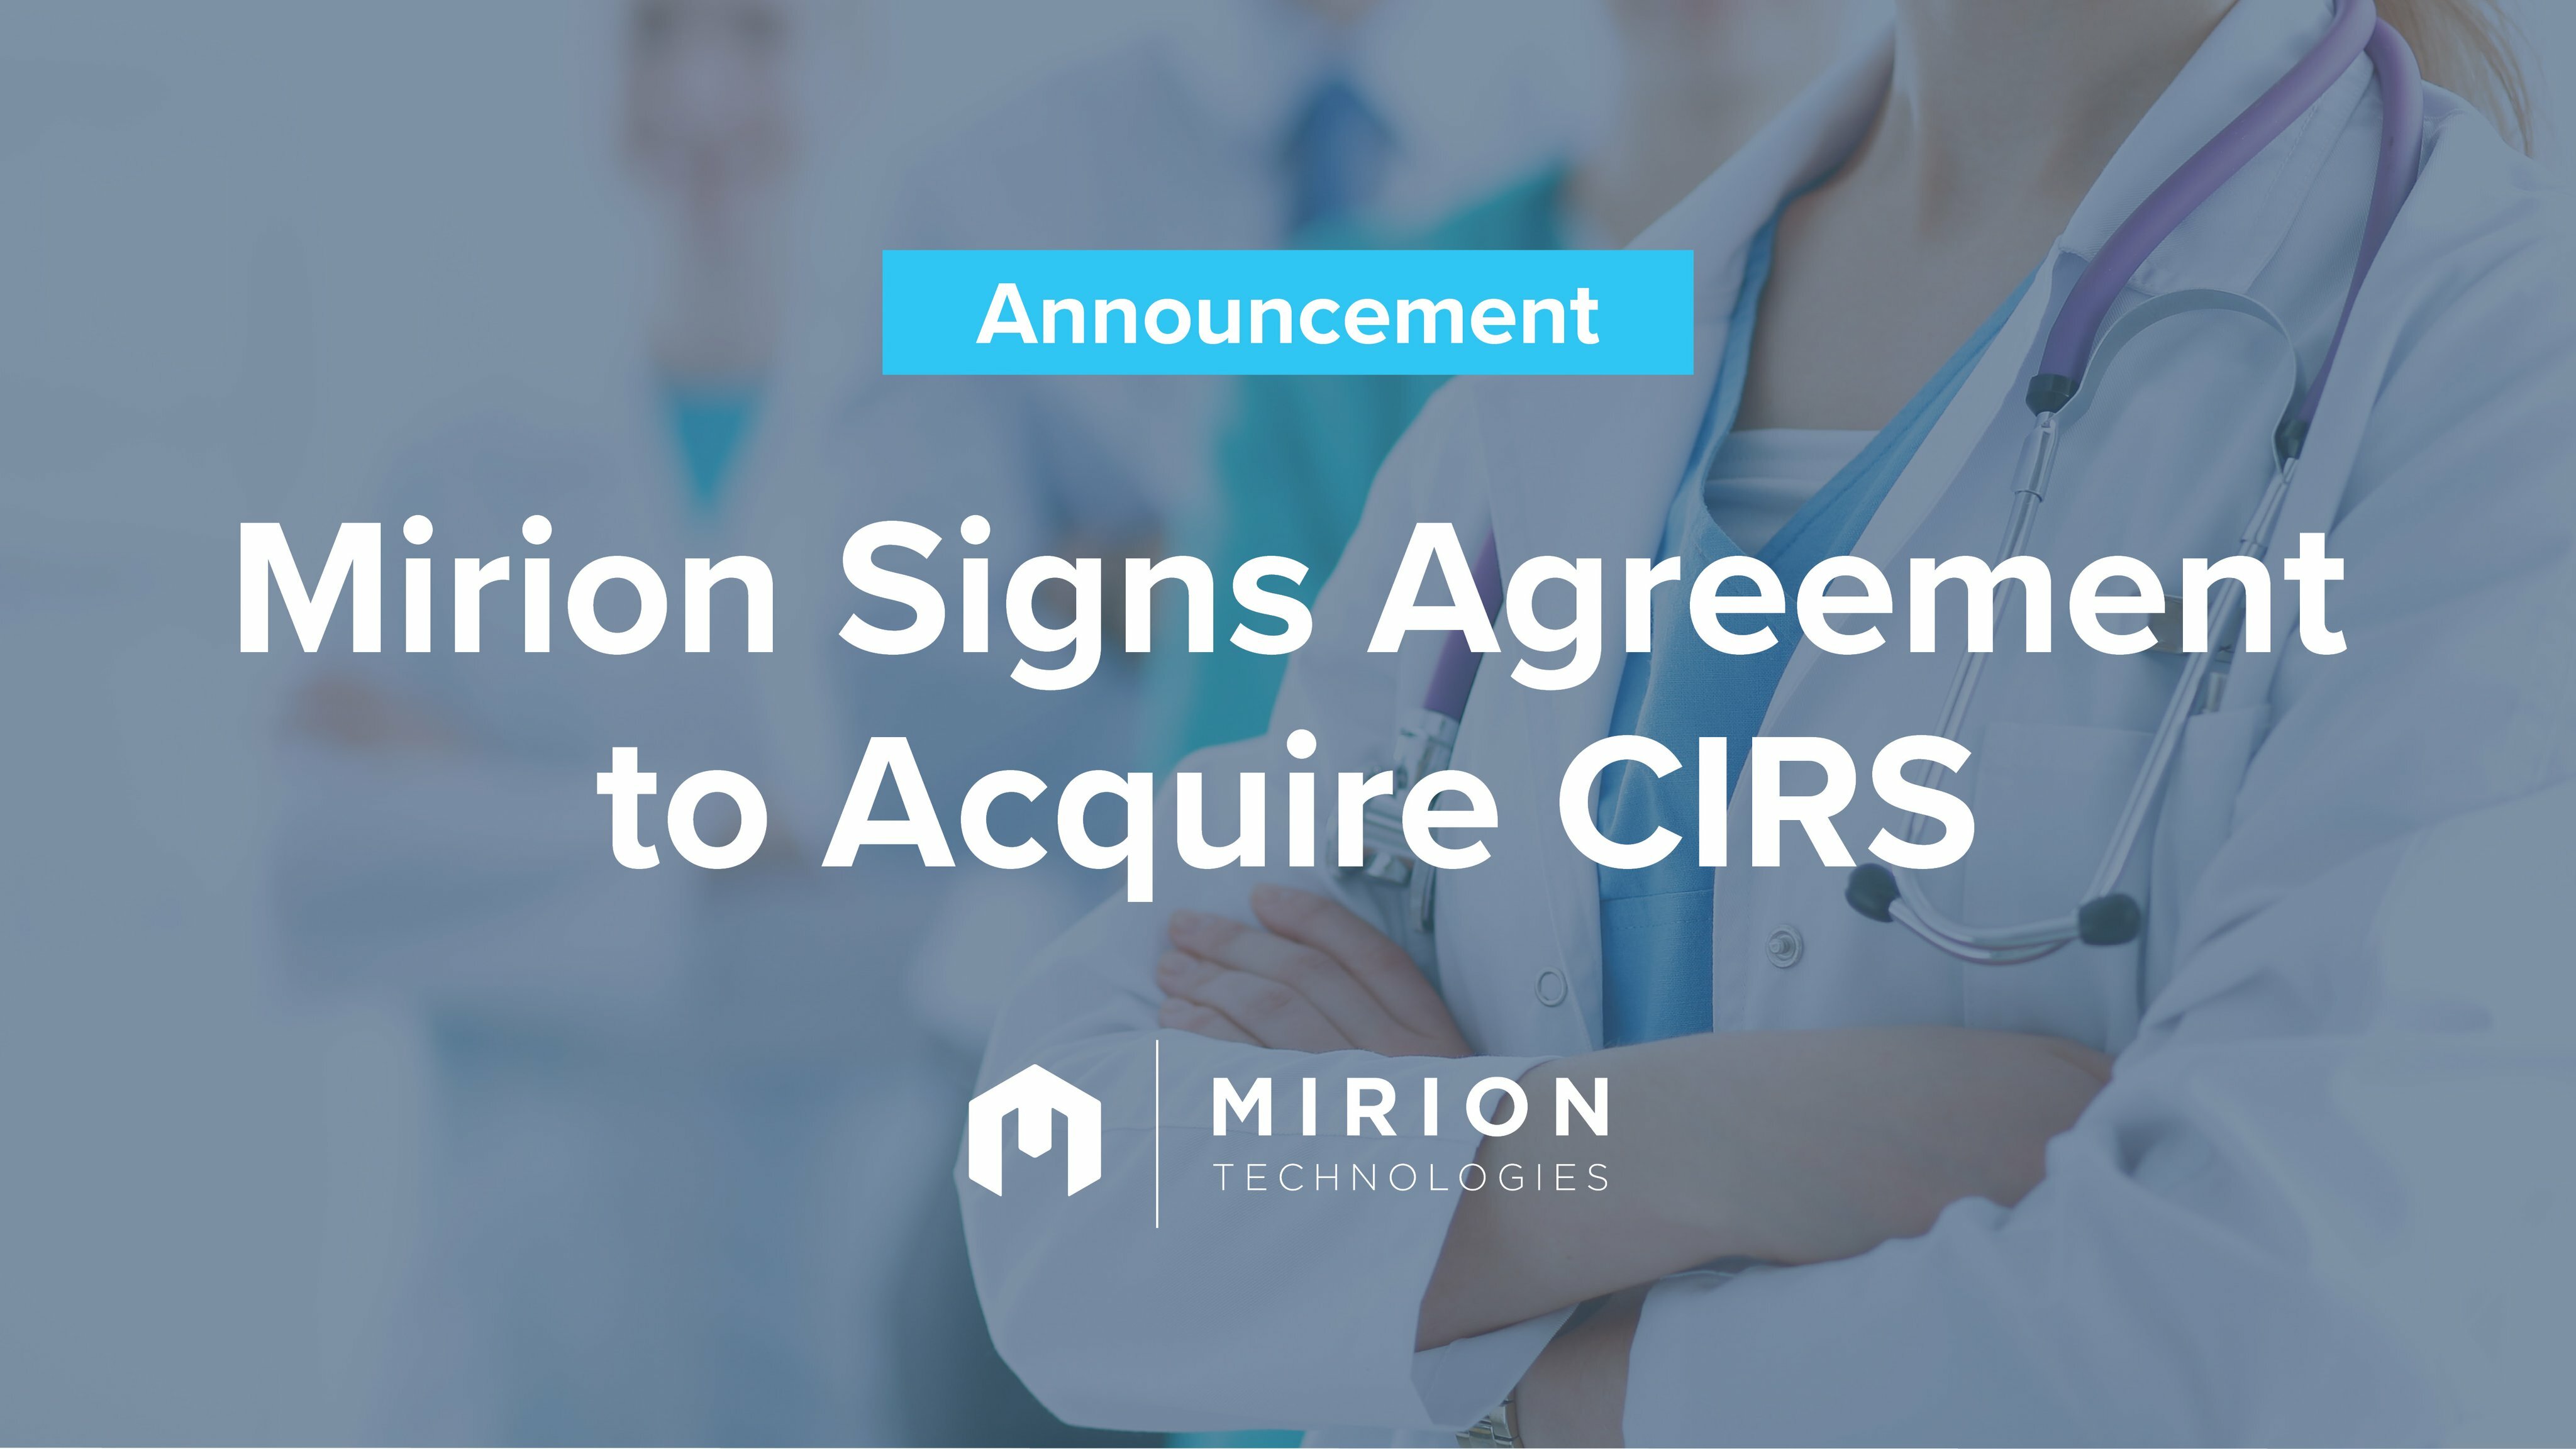 Mirion Technologies, Inc. to Acquire Computerized Imaging Reference Systems, Inc.; Expanding Capabilities in Existing Medical Platform